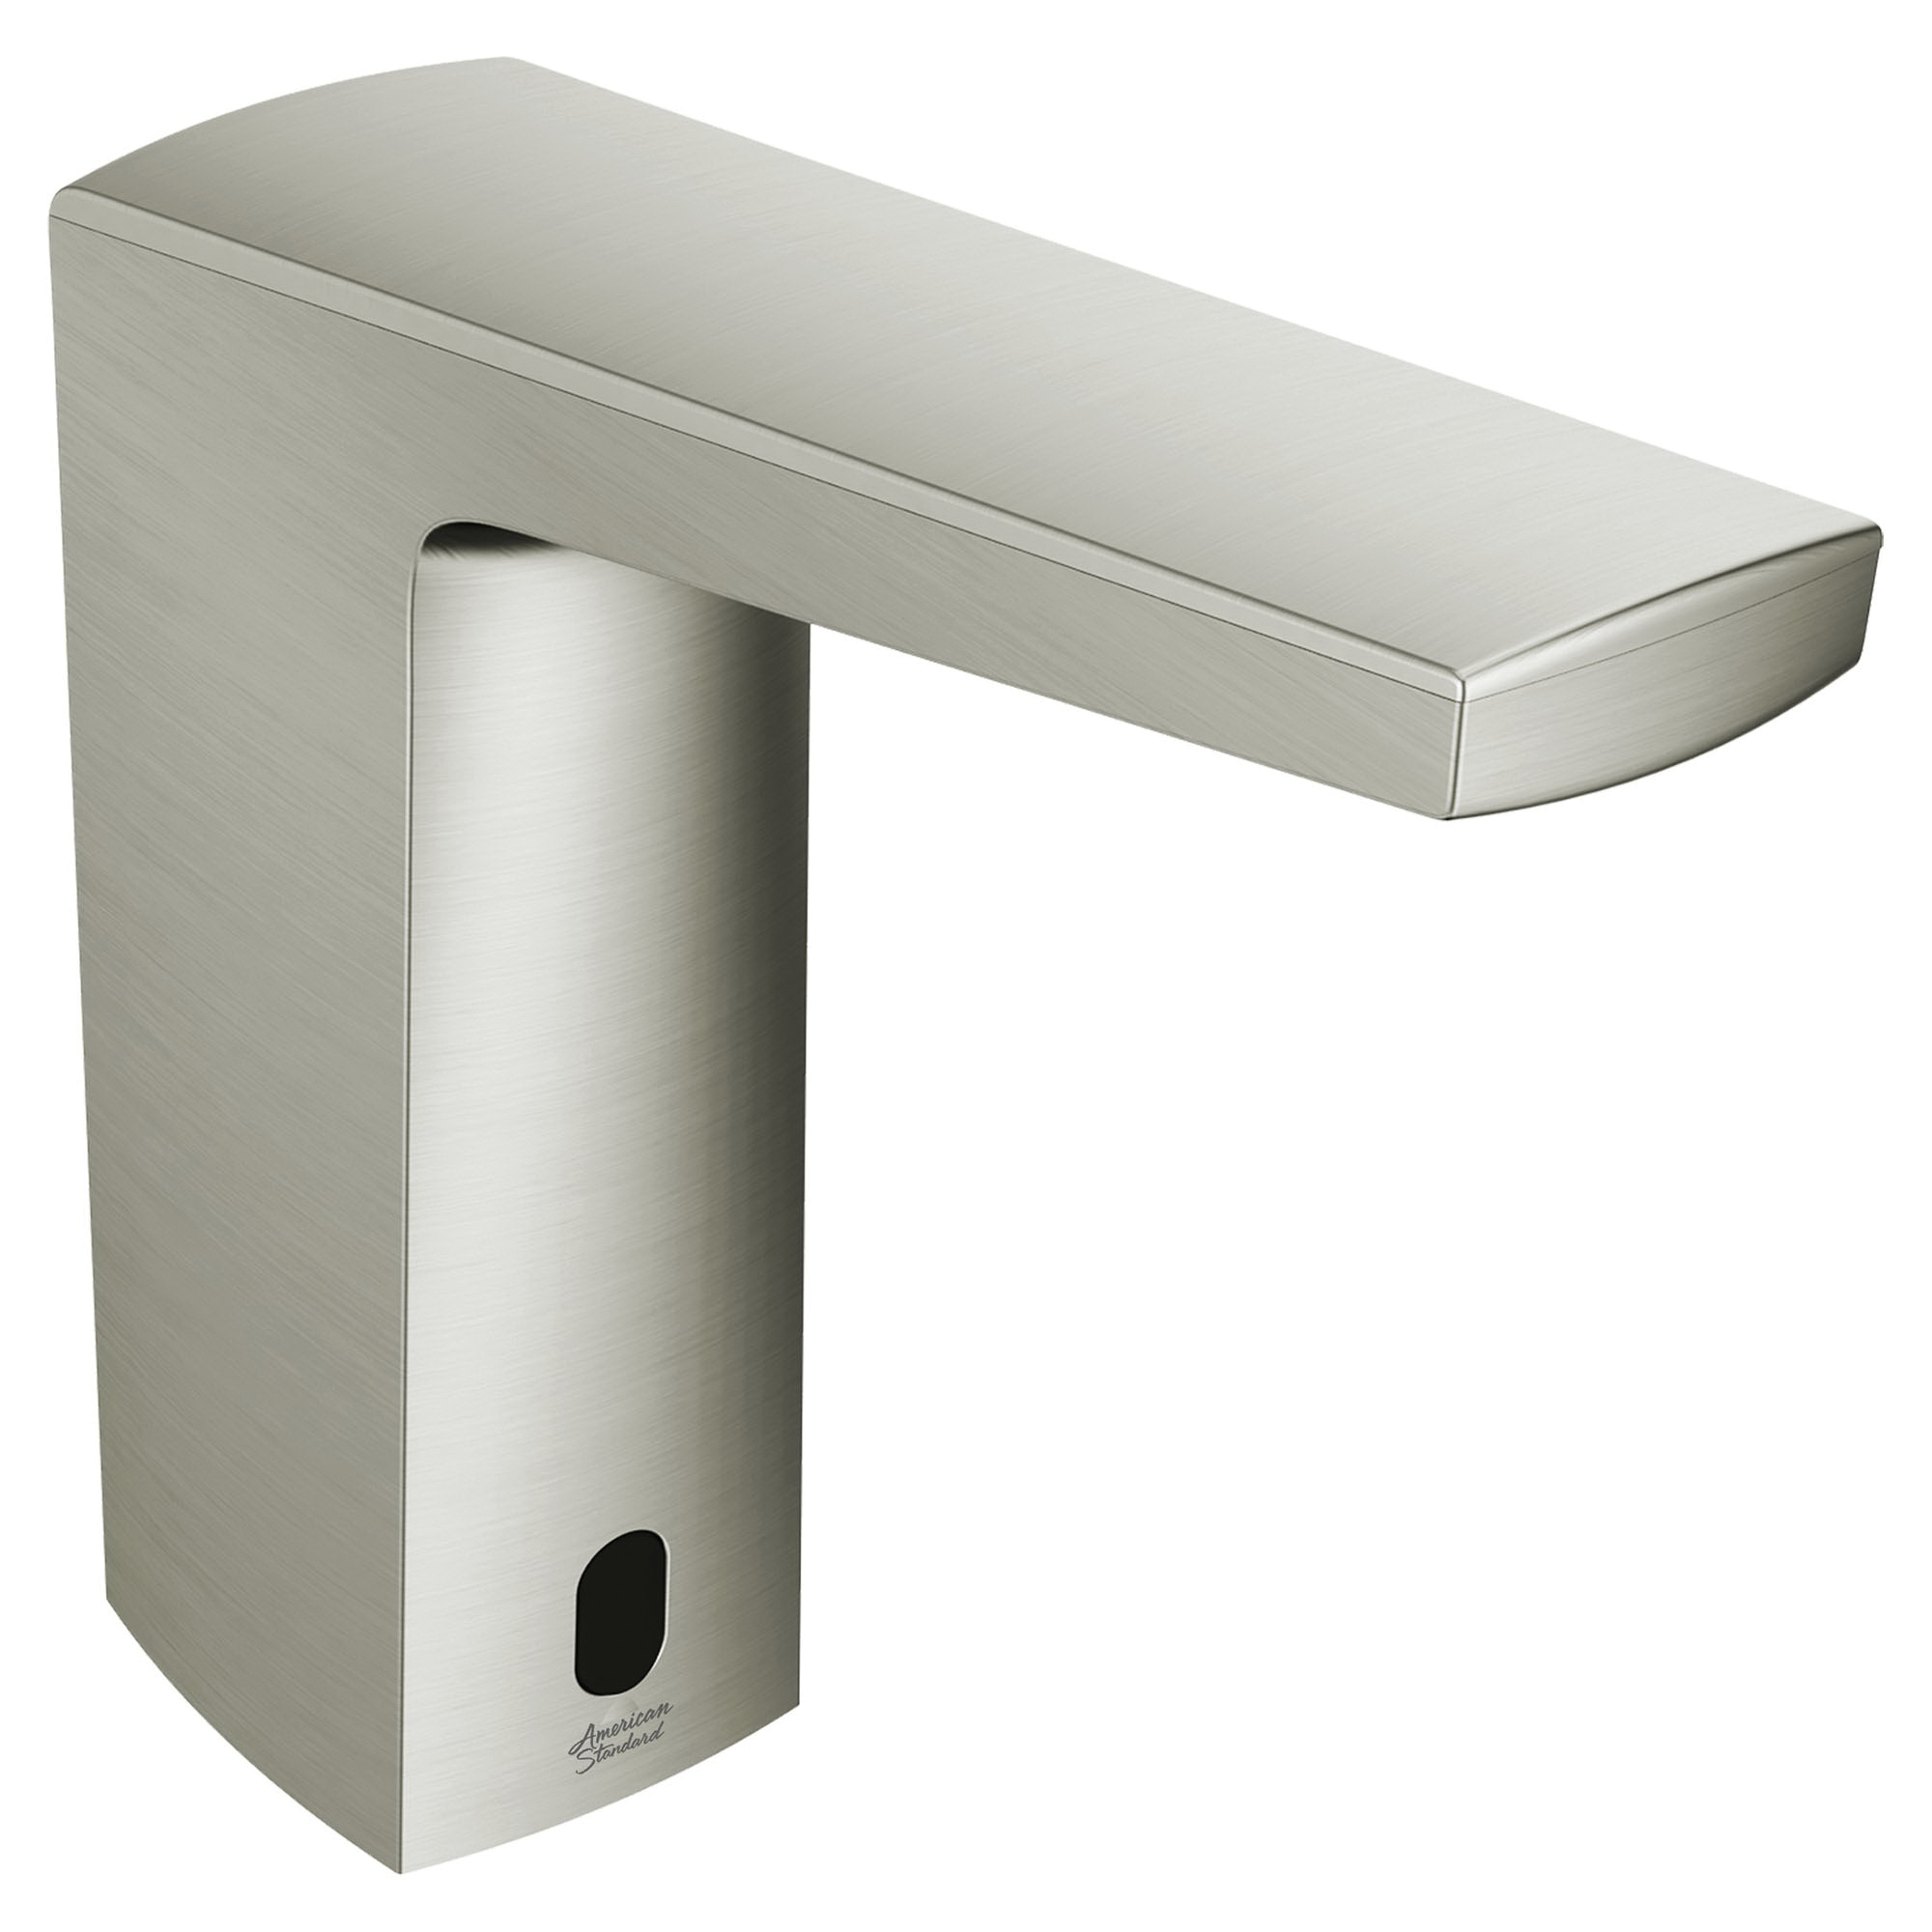 American Standard SmarTherm™ 702B205.295 Faucet, 1.5 gpm Flow Rate, Polished Chrome, Function: Touchless